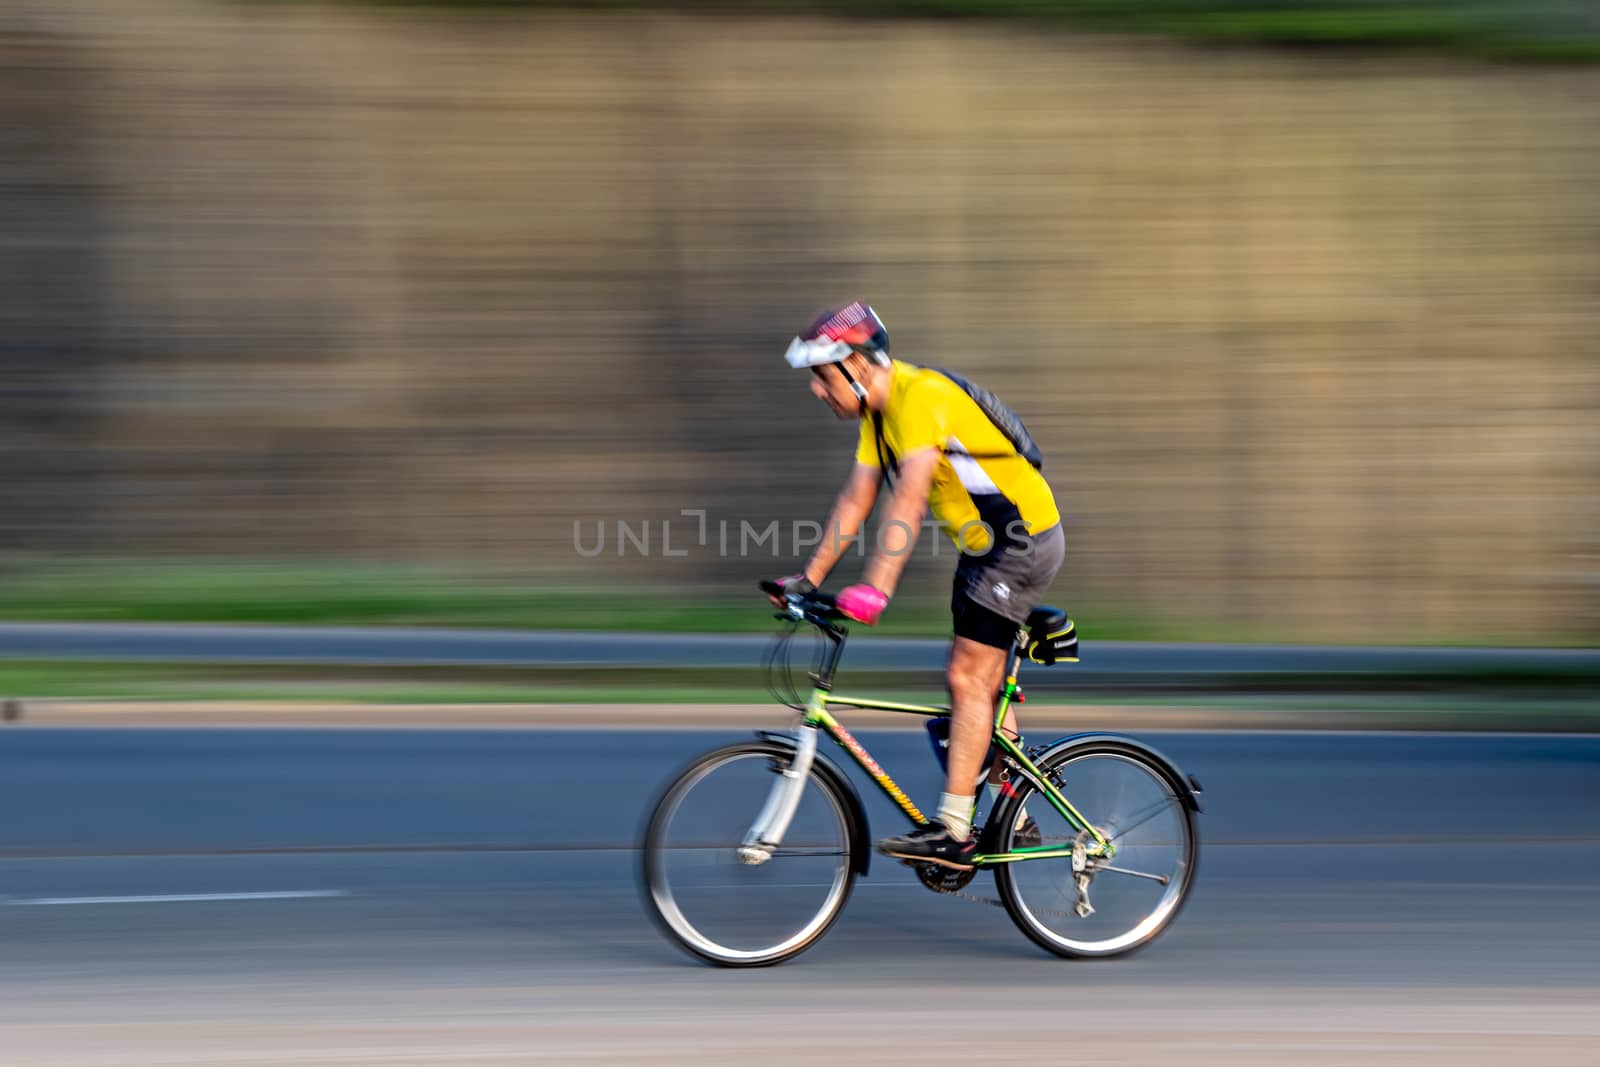 Pune, Maharashtra, India - October 4th, 2017 : Motion blur, panning image of a bicycle rider wearing helmet for safety on a way for fitness